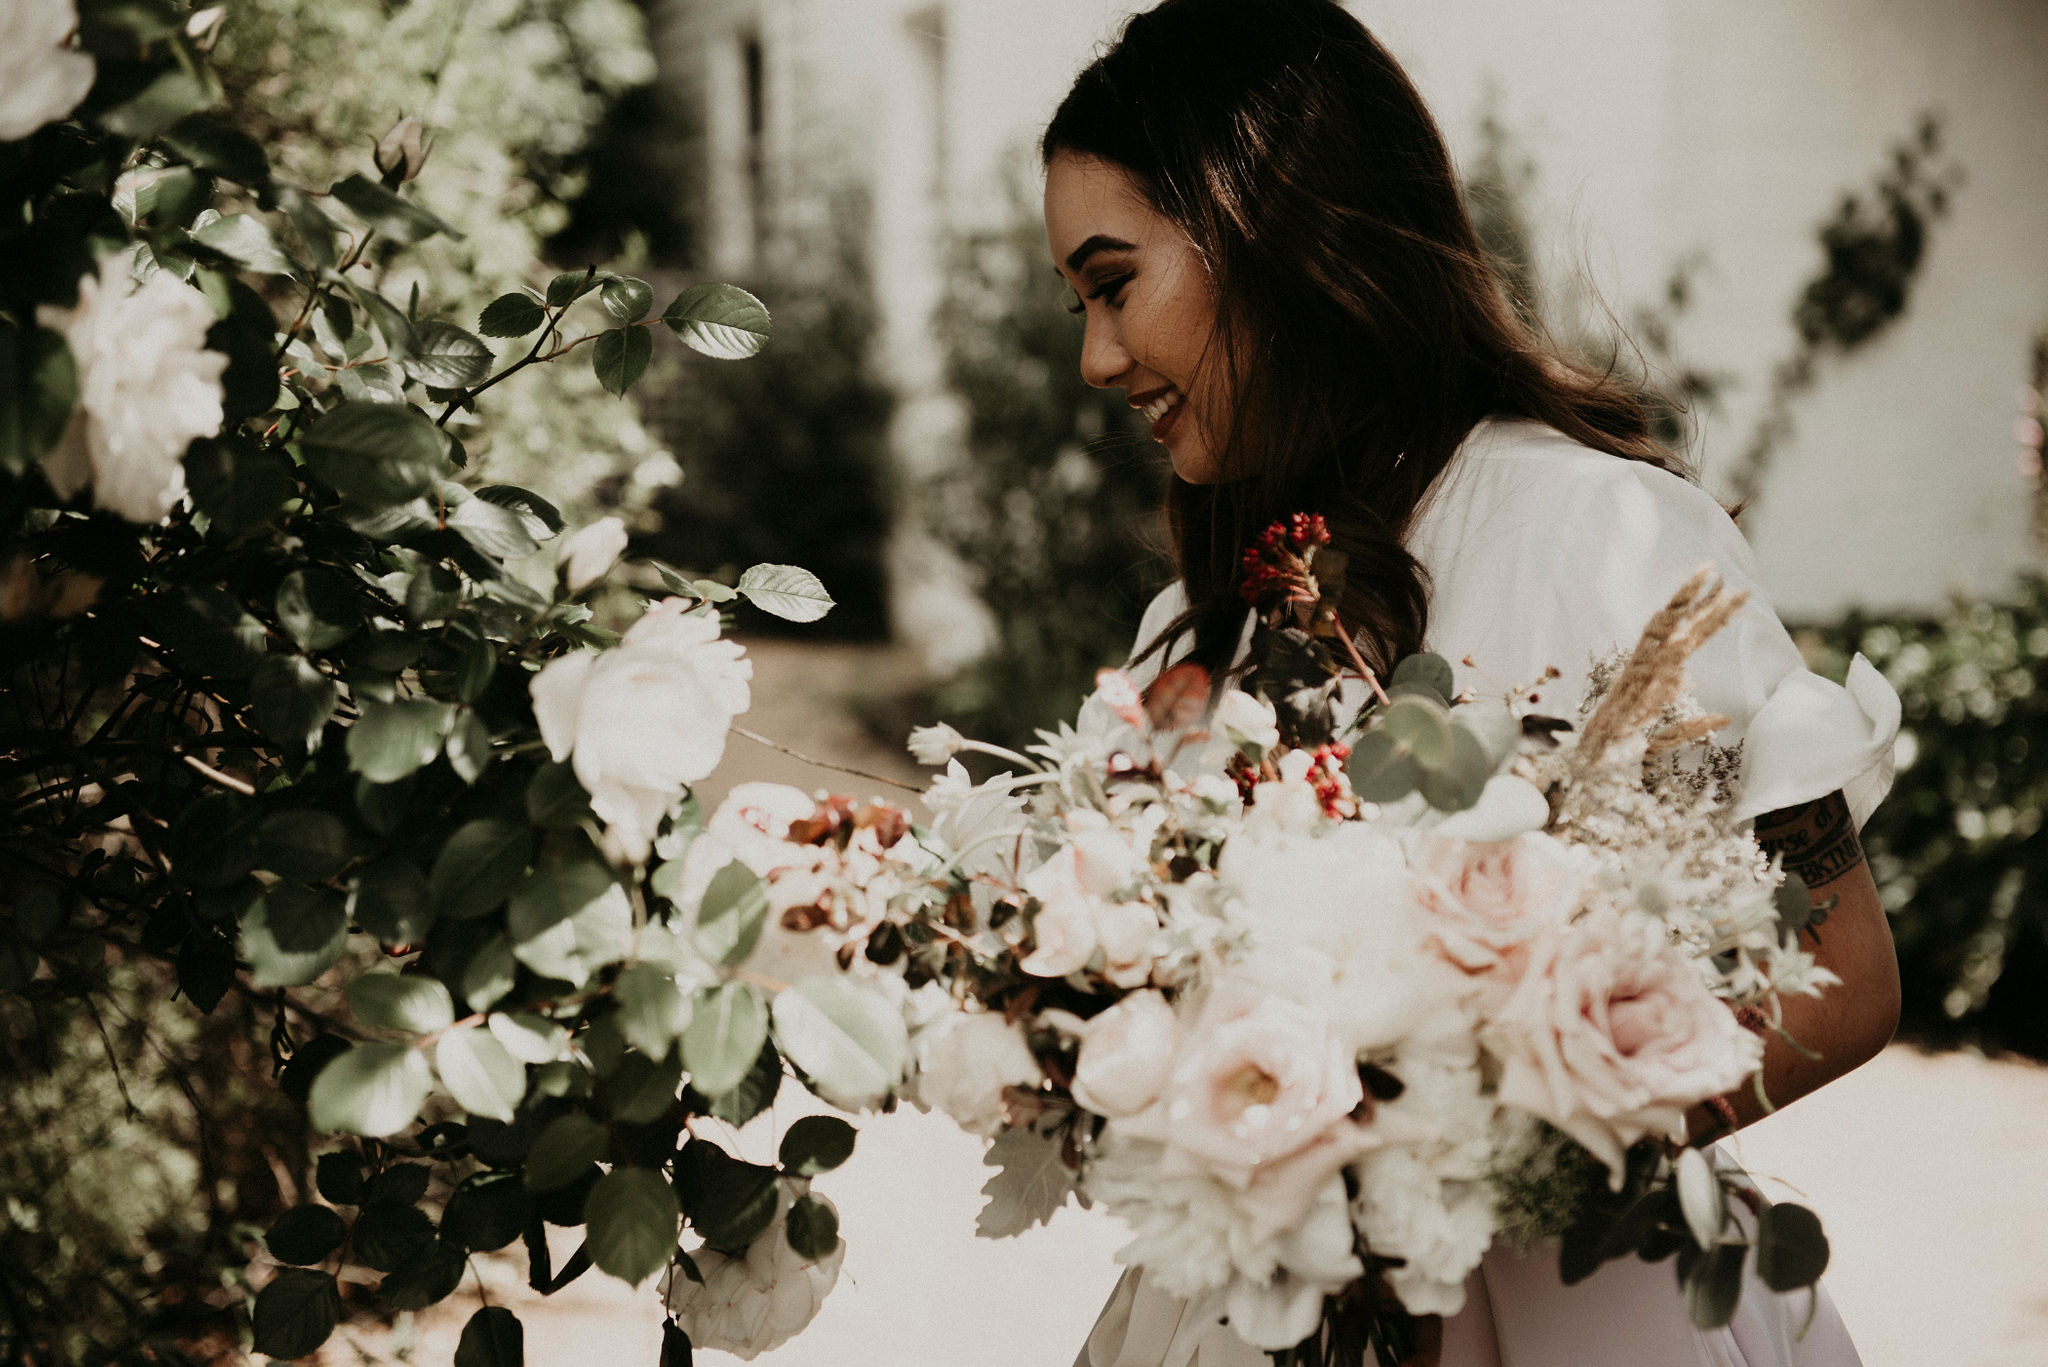 Bride stops to smell the roses in the garden holding her bouquet Elopement and Wedding Photography Melbourne Photographer Sarah Matler